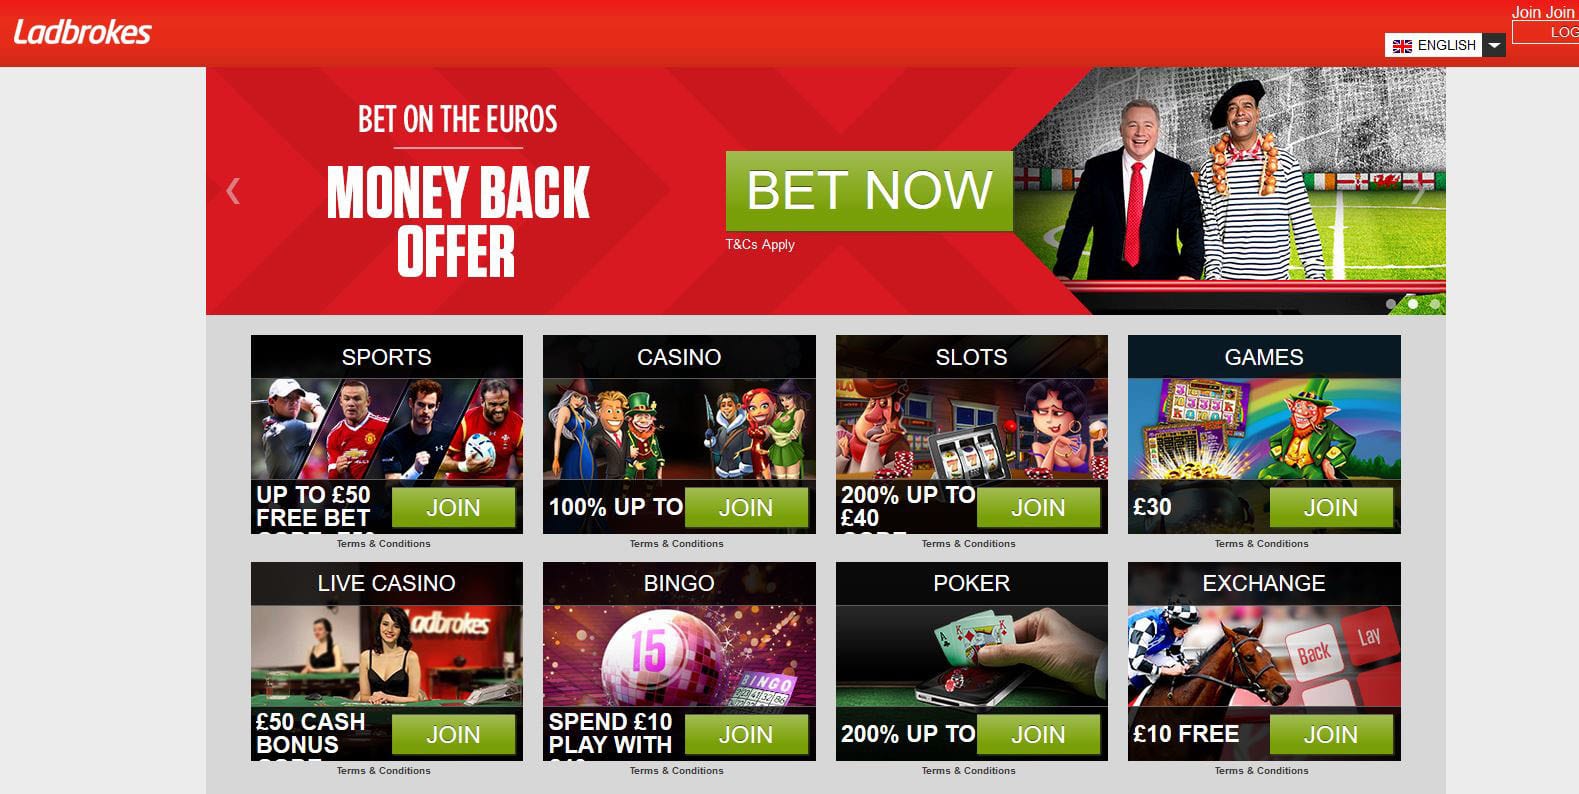 Ladbrokes Casino Review - the Pros and Cons